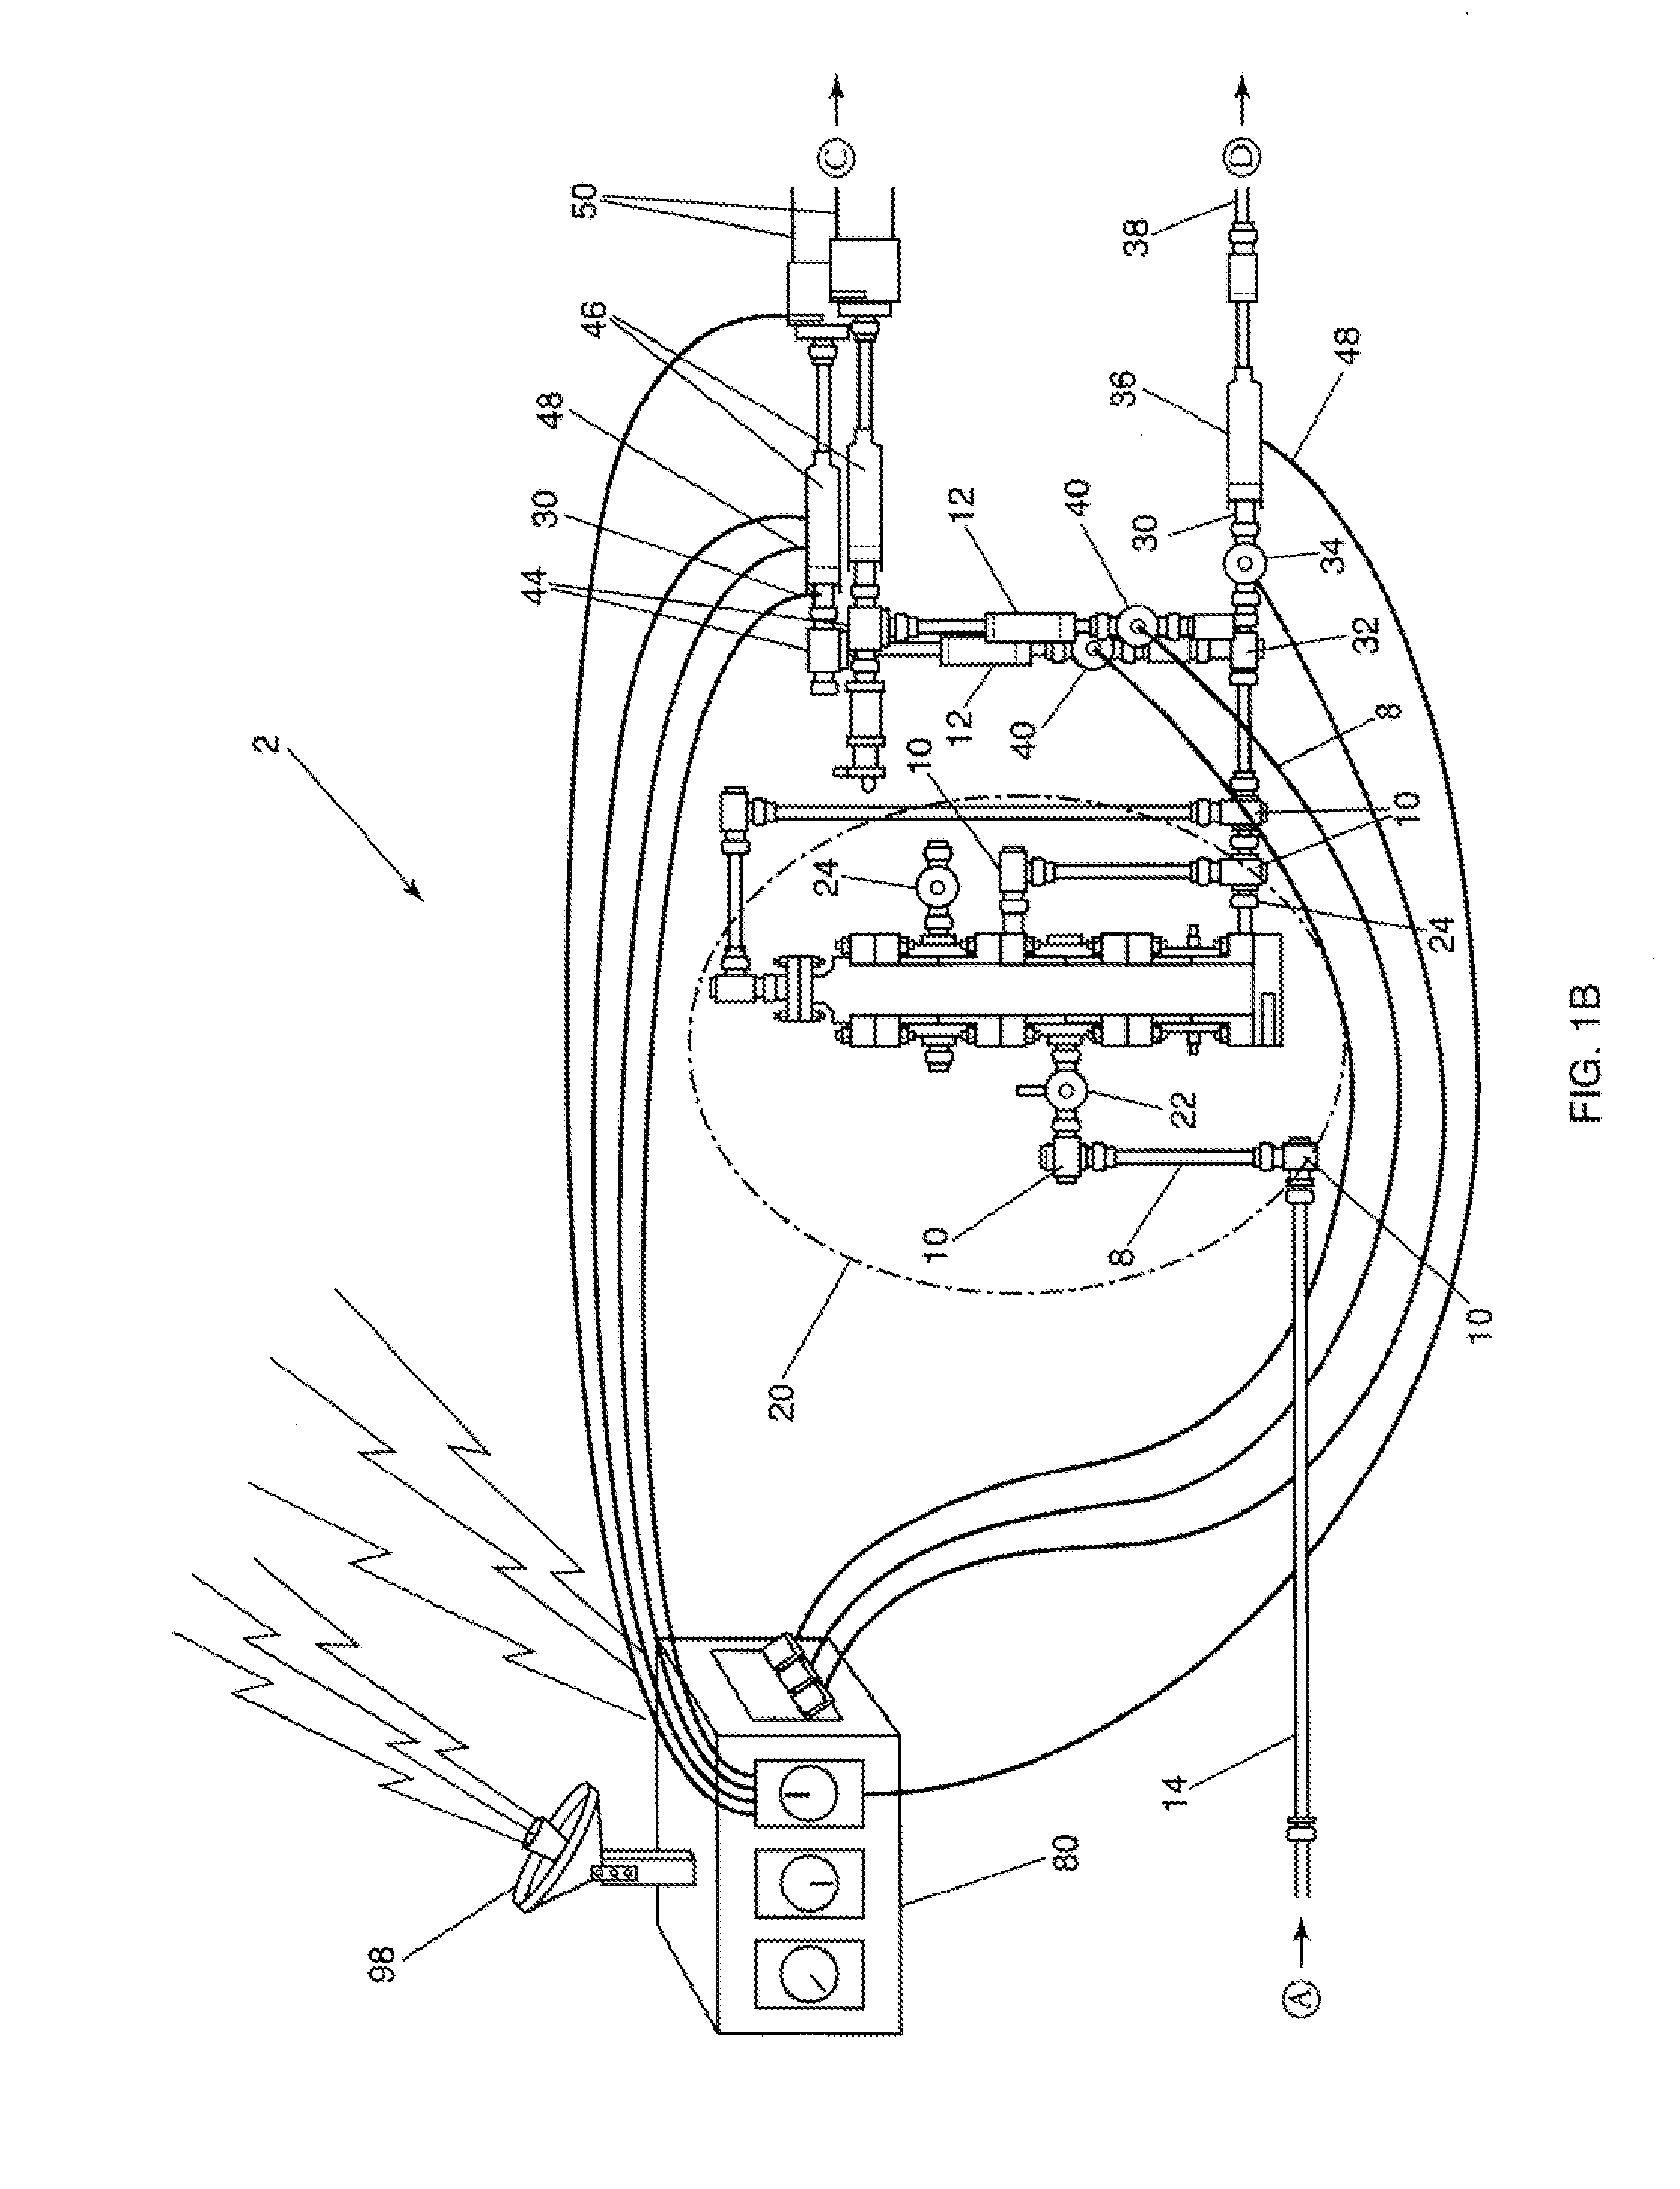 Automated closed loop flowback and separation system